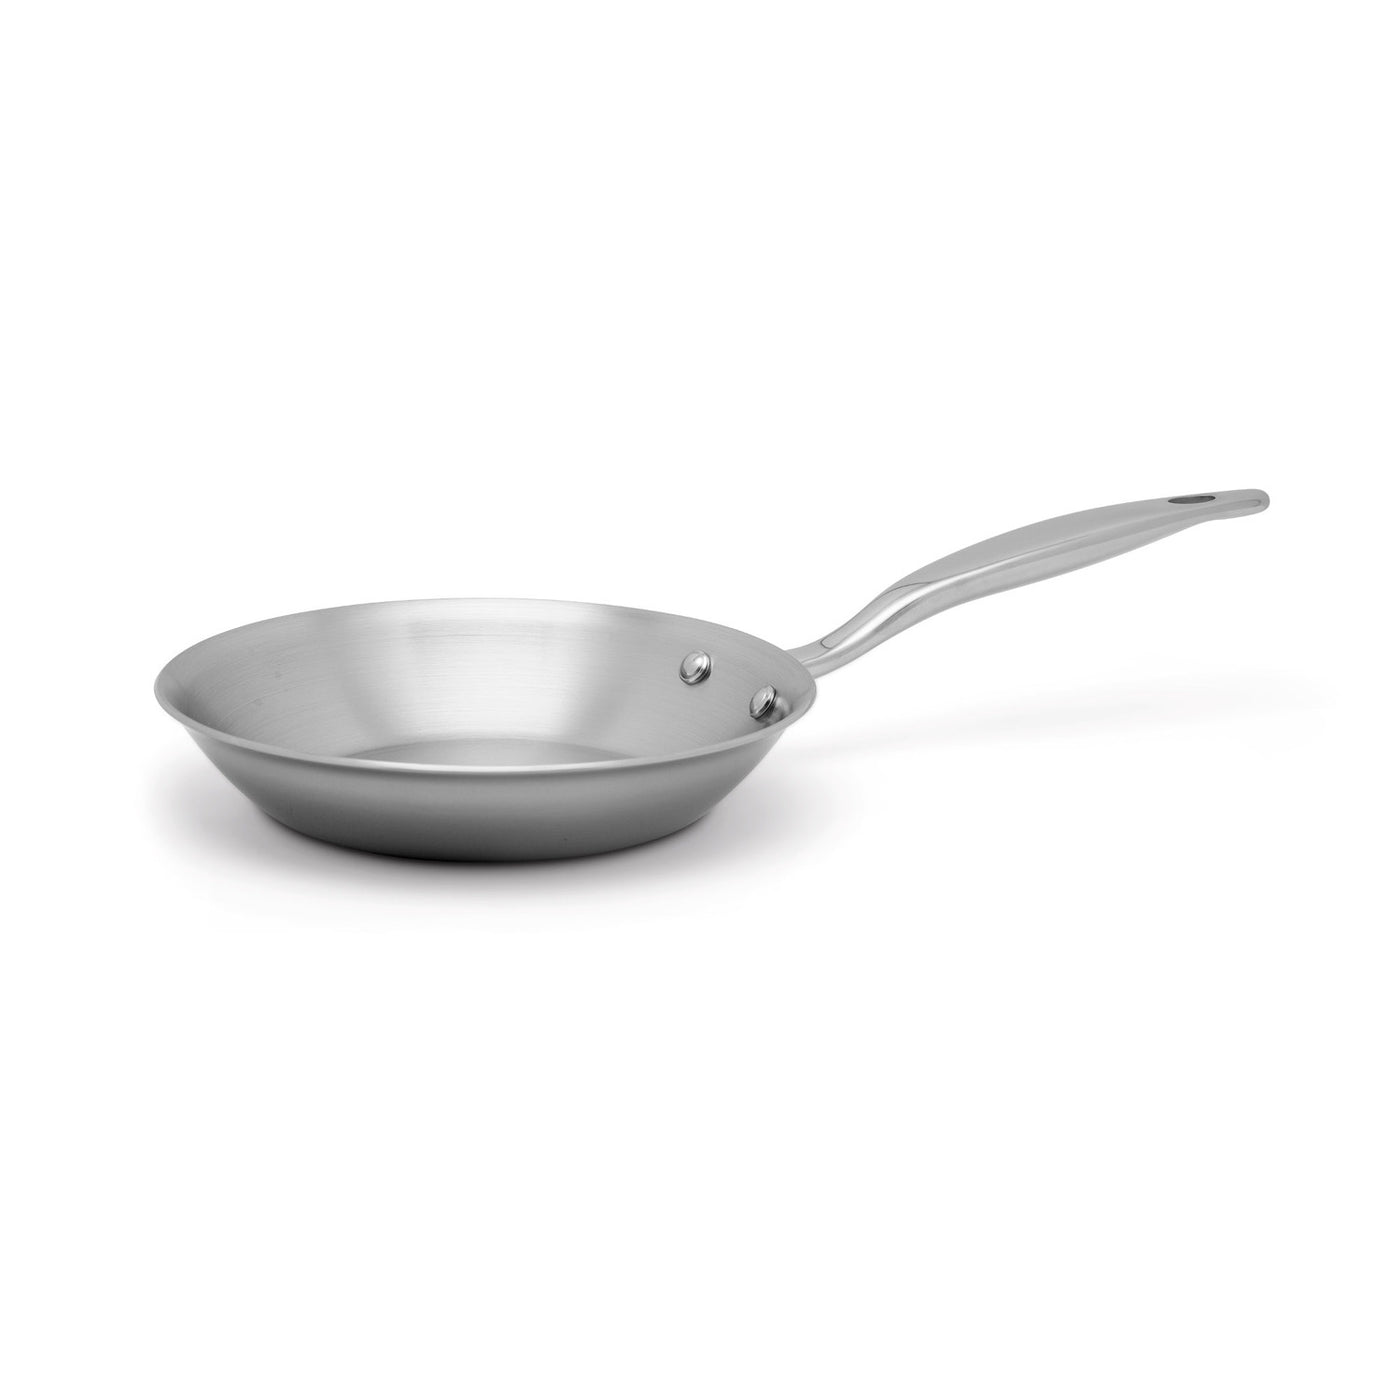 All-Clad Stainless Steel D3 Everyday Deep 8.5 Inch and 10.5 Inch Fry-Pan Set